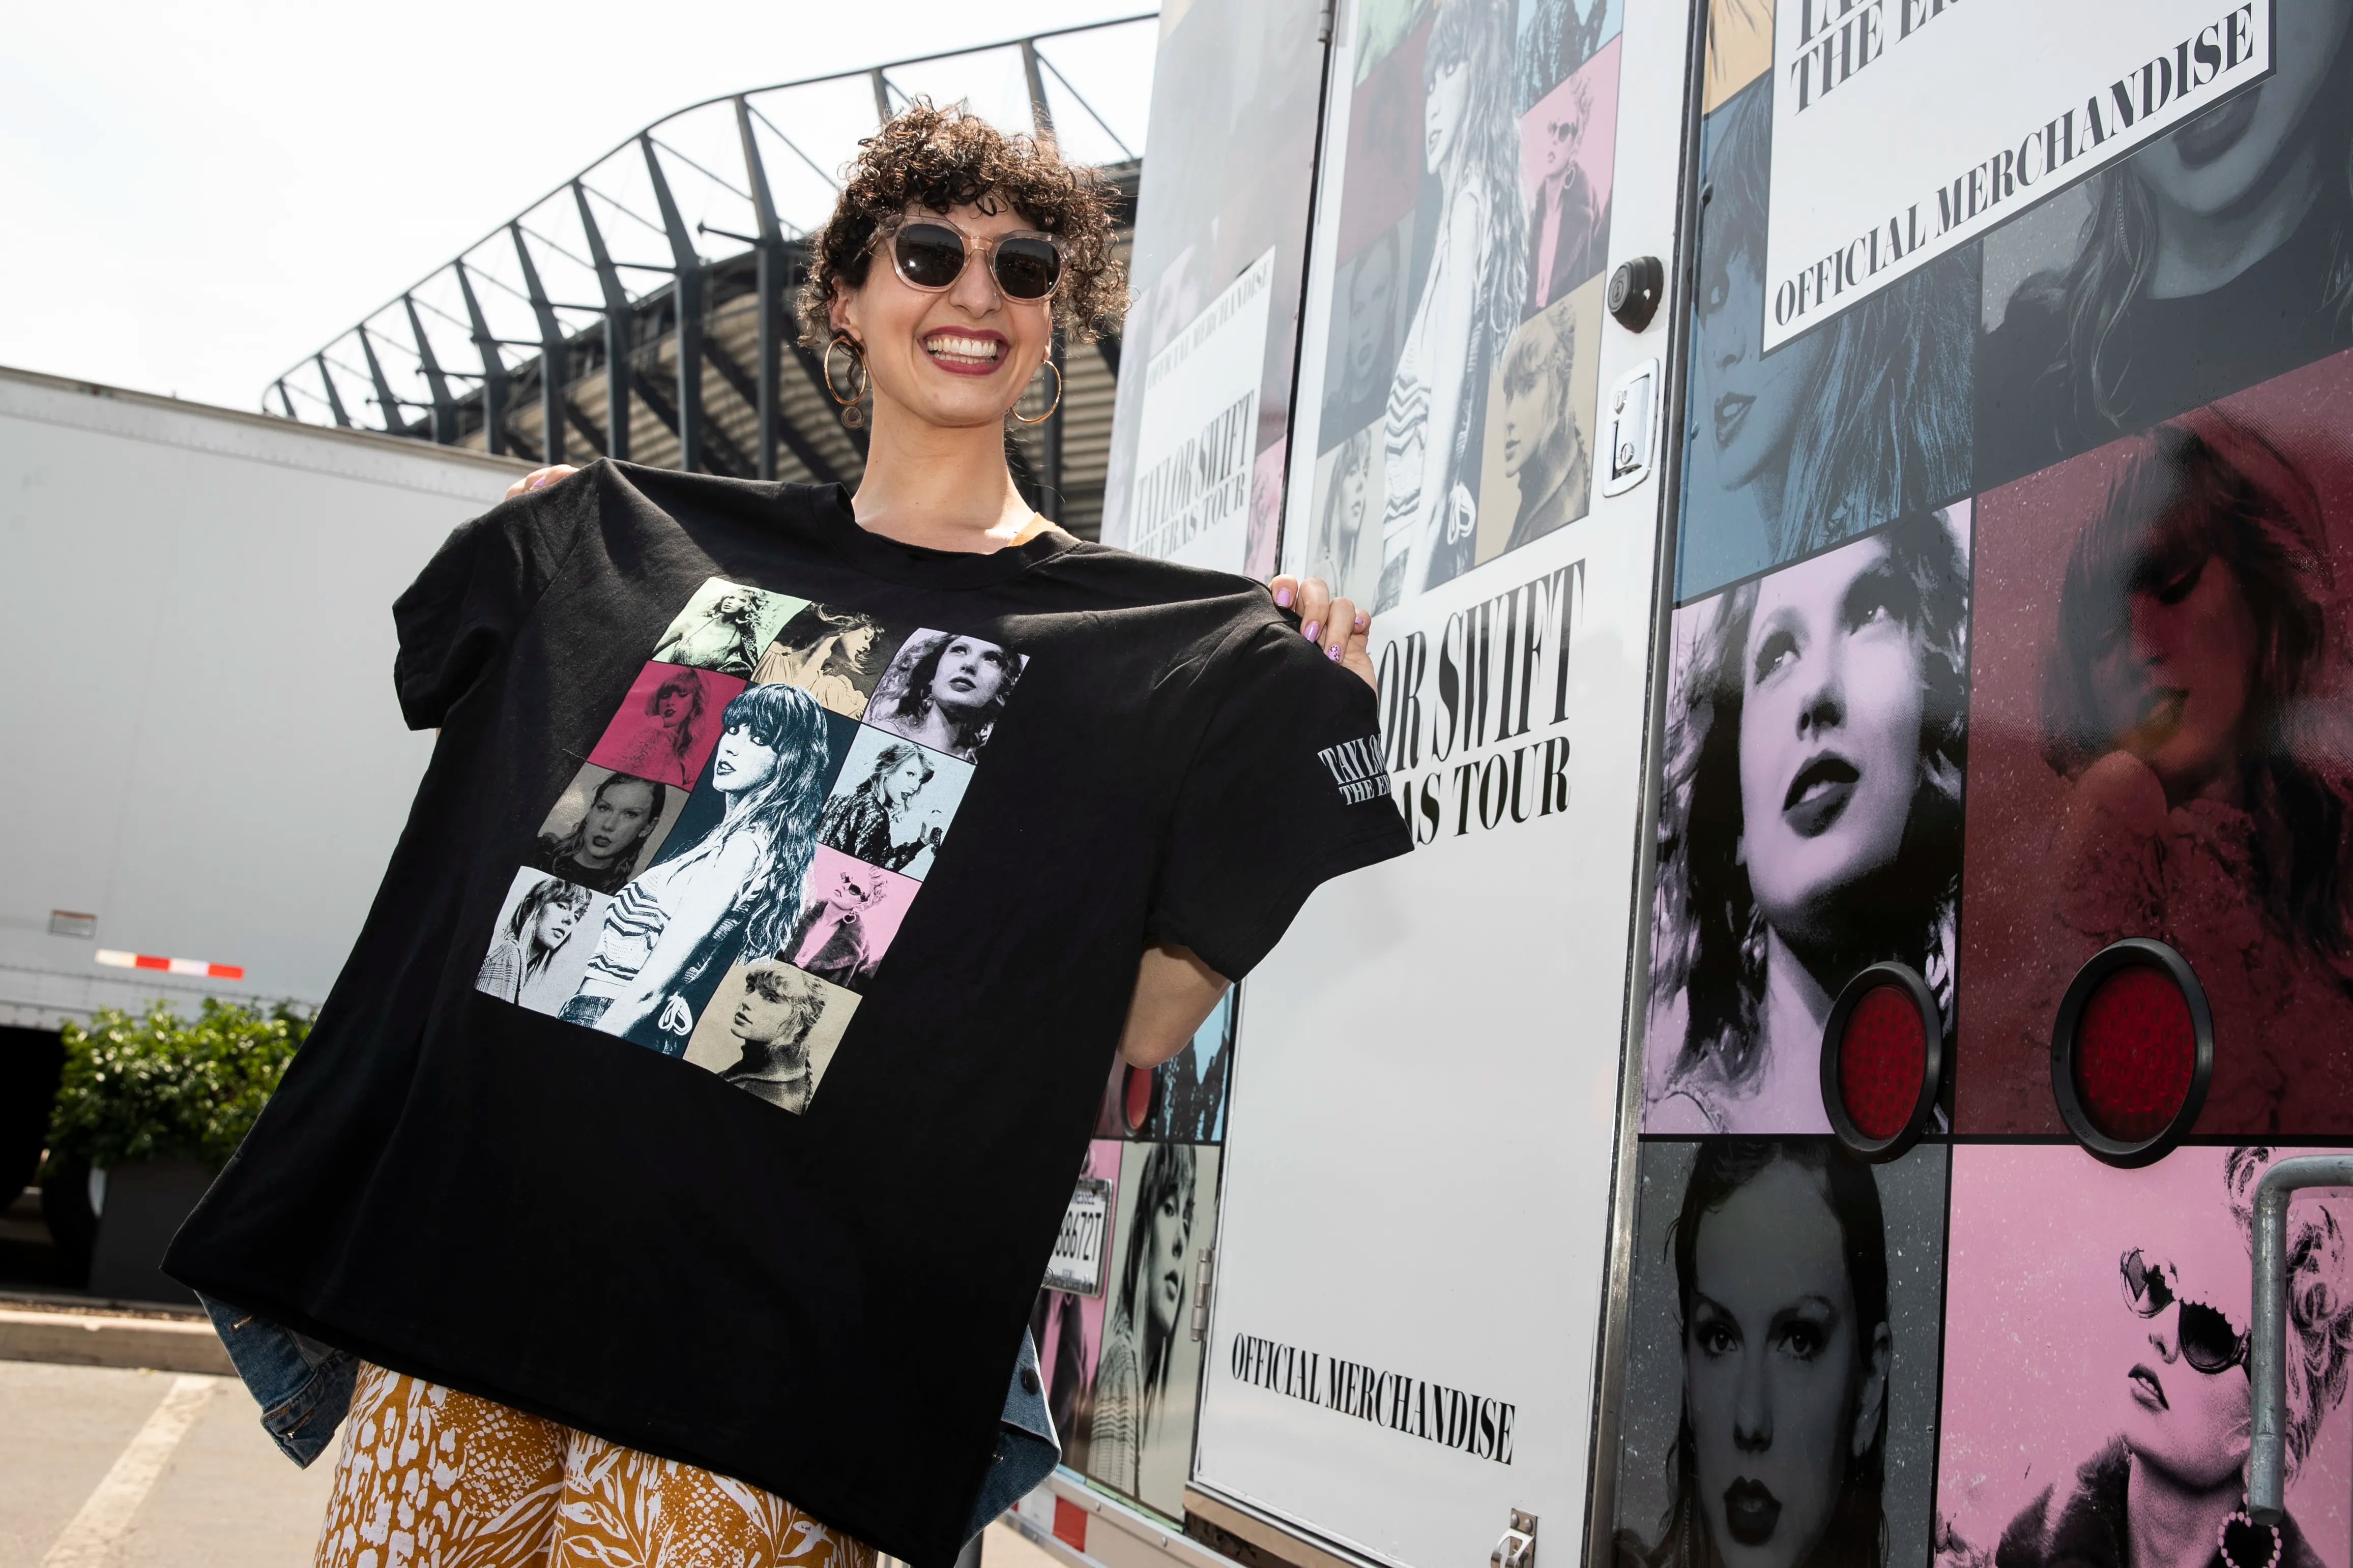 Taylor Swift tour merch seekers stand in line for concert gear